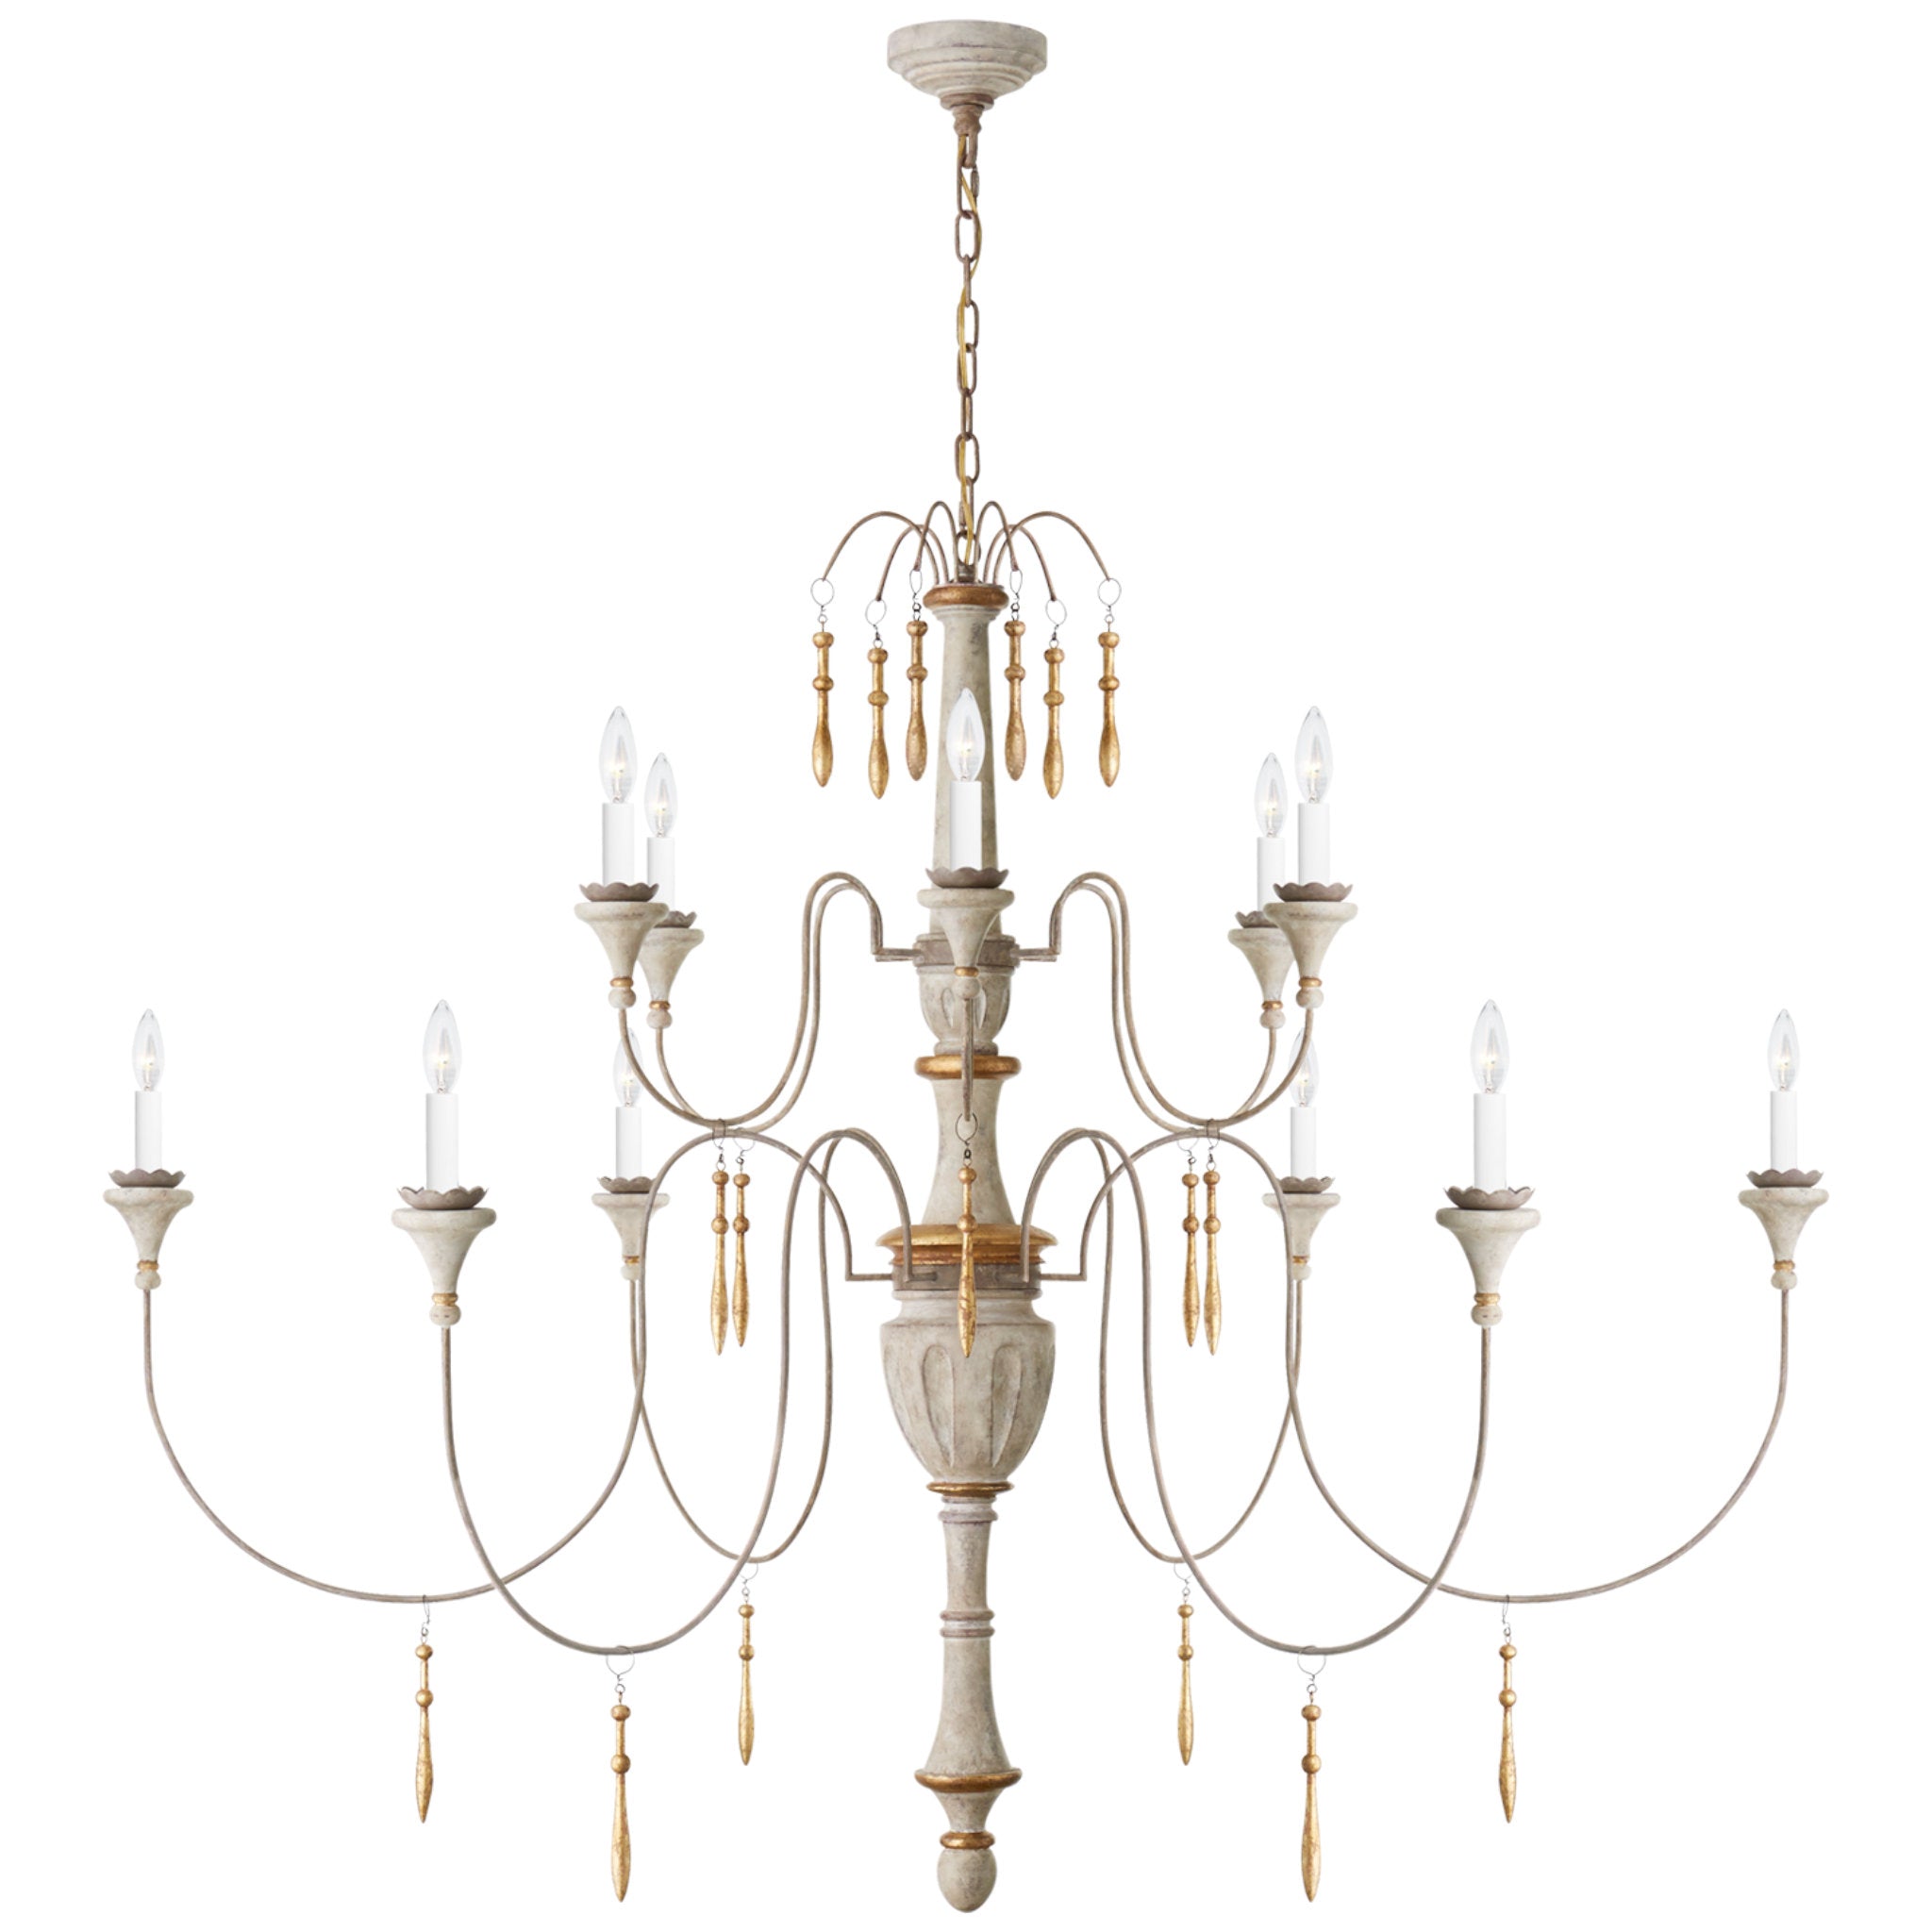 Julie Neill Fortuna Large Chandelier in Vintage White and Gild